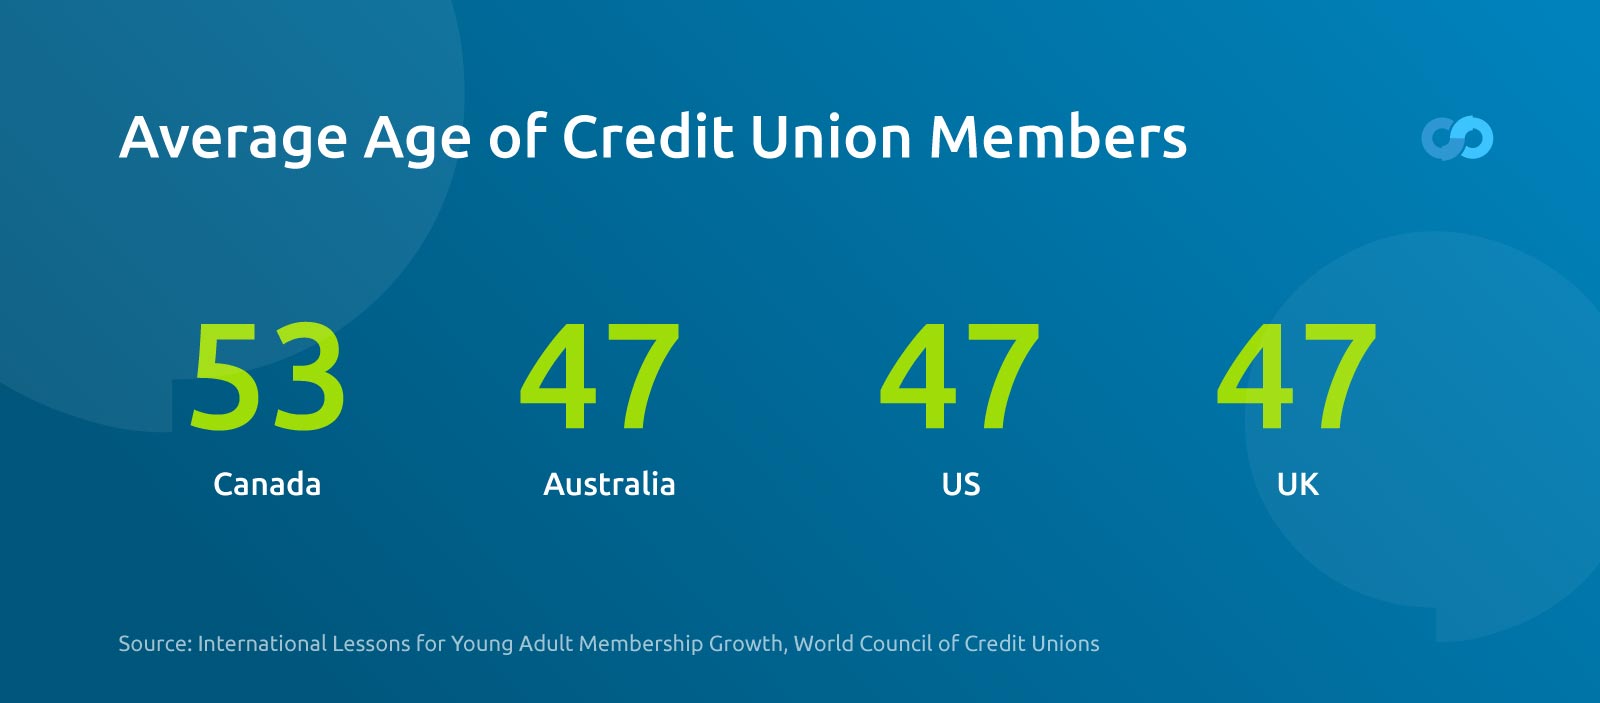 Avg Age of Credit Union Members